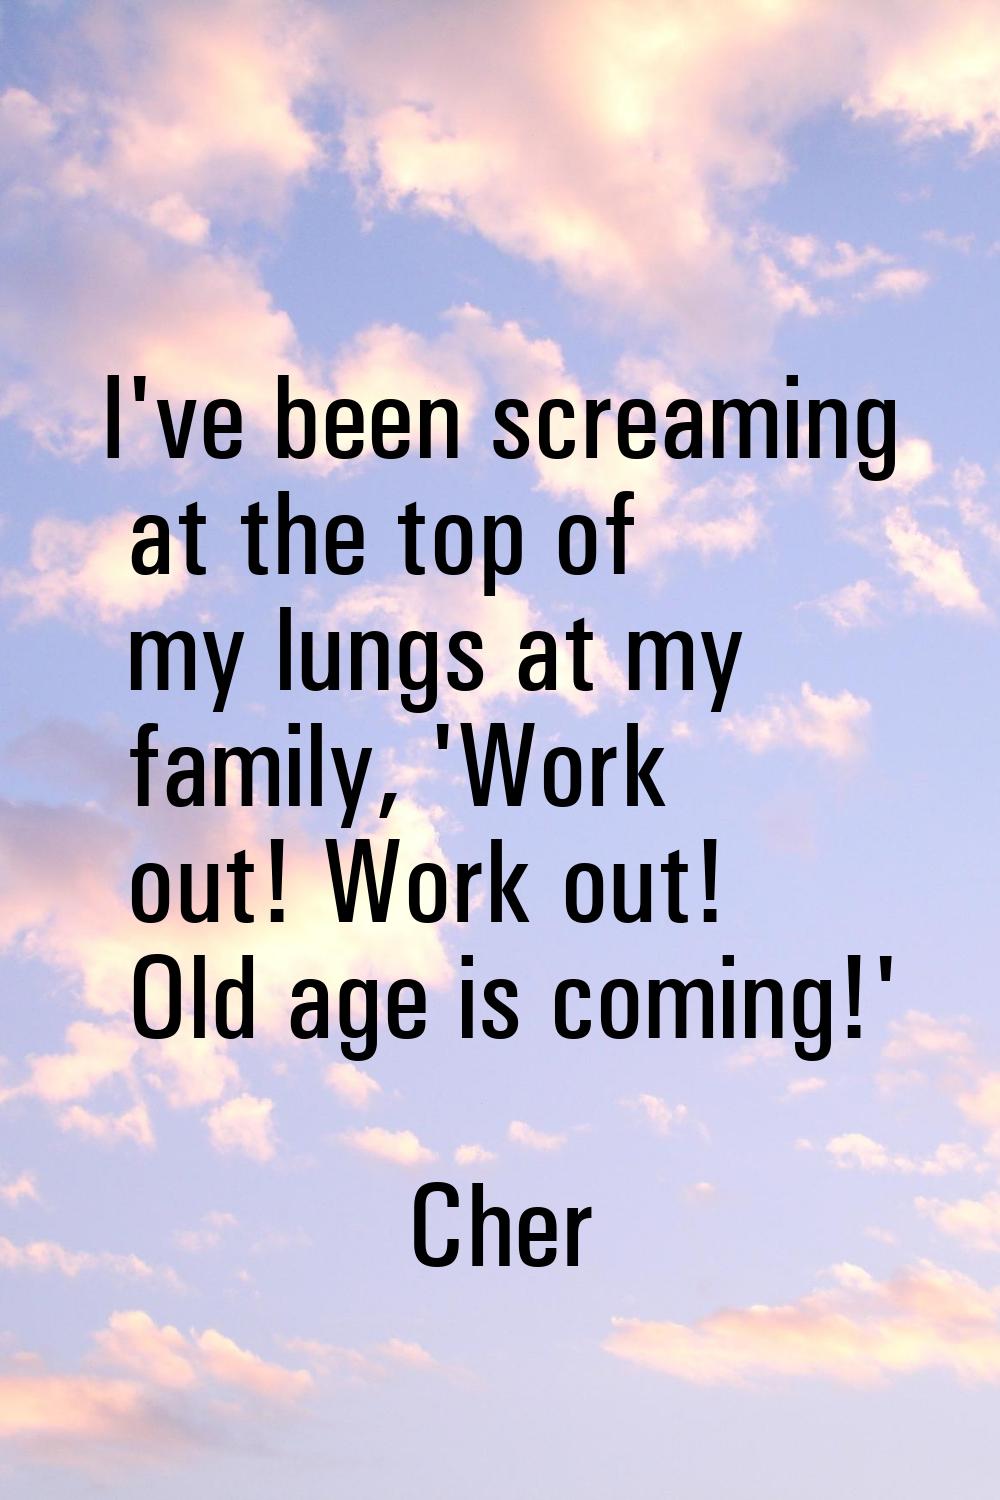 I've been screaming at the top of my lungs at my family, 'Work out! Work out! Old age is coming!'